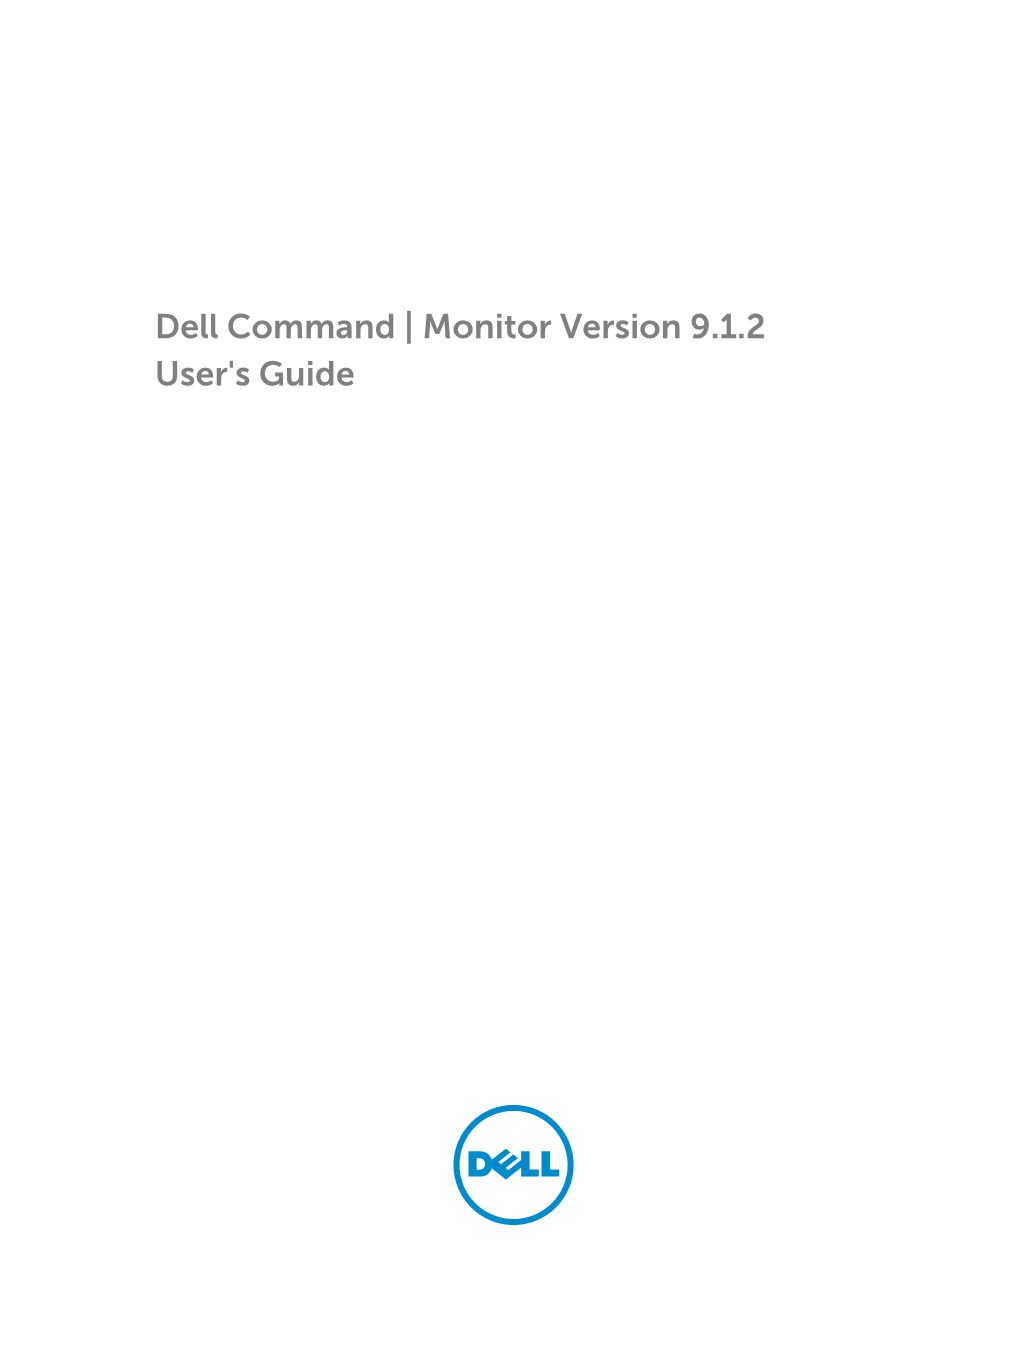 Dell Command | Monitor Version 9.1.2 User's Guide Notes, Cautions, and Warnings